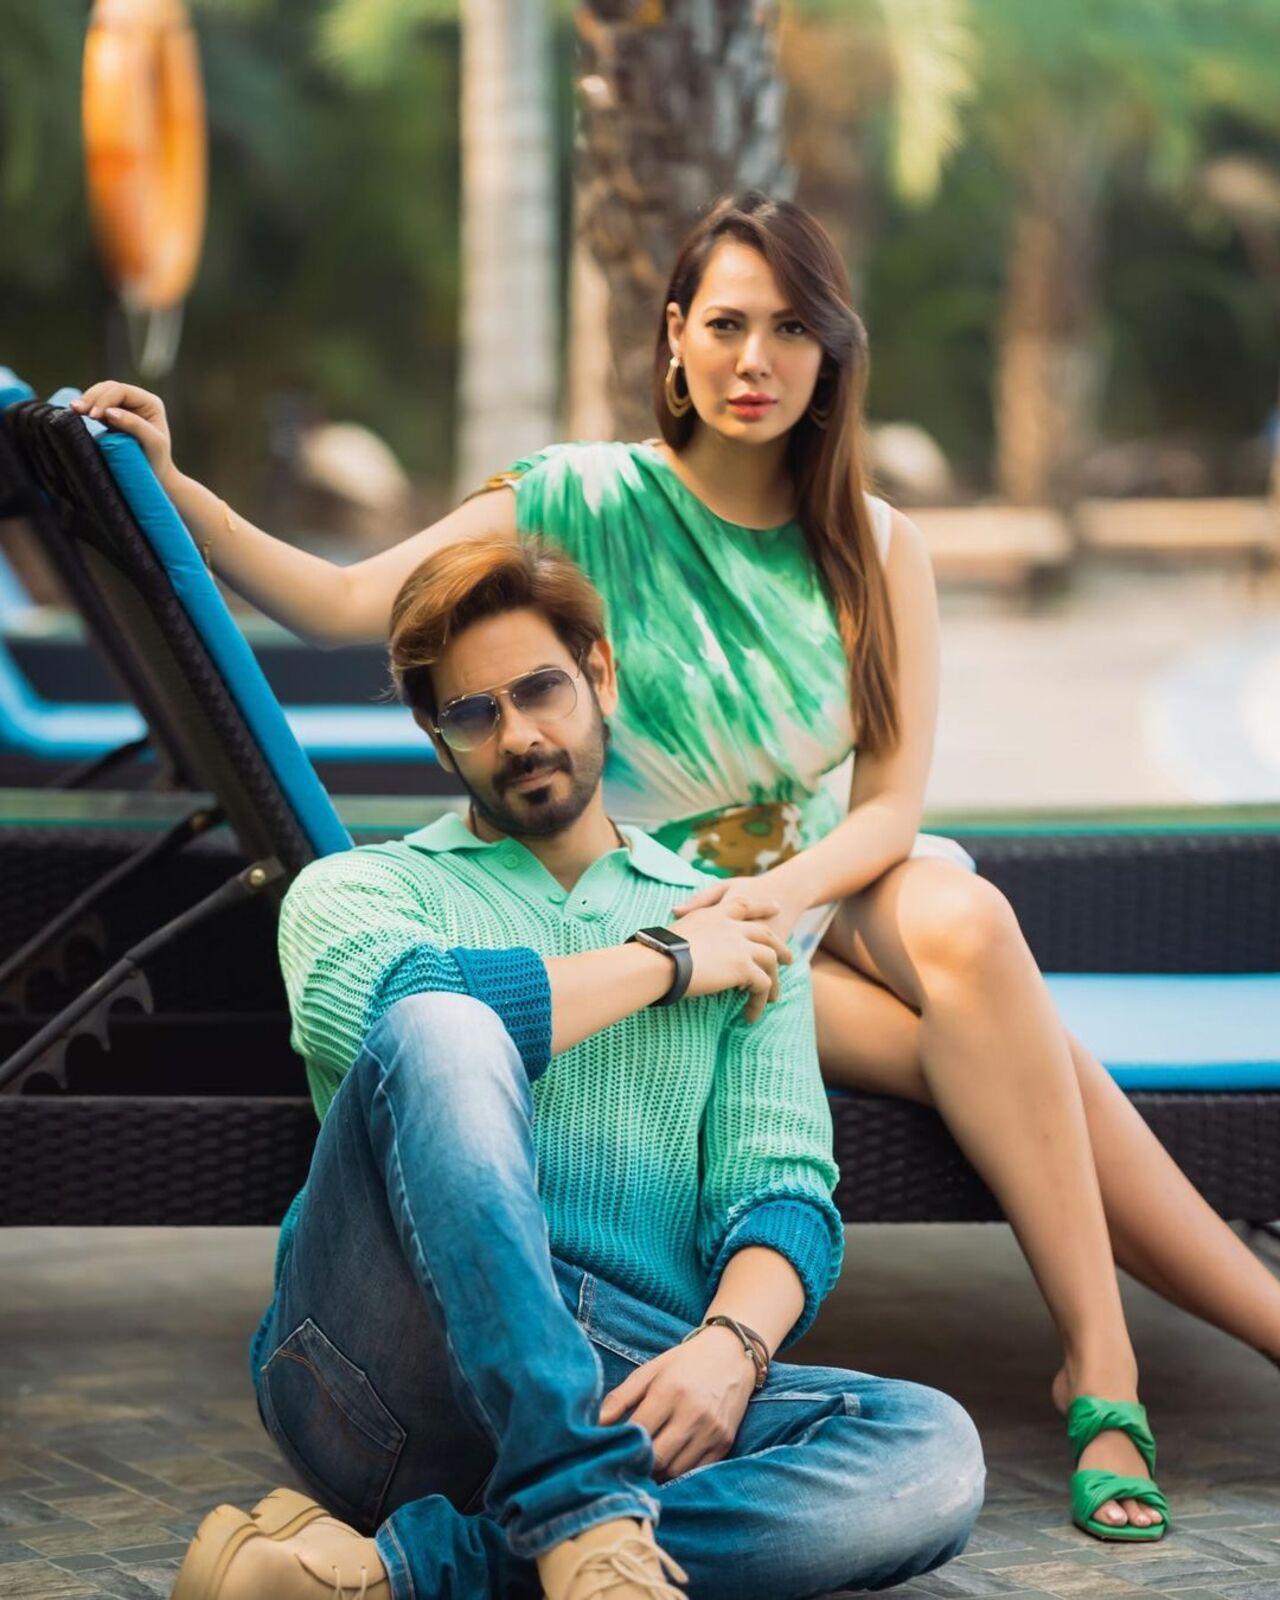 The tale of Rochelle Rao and Keith Sequeira’s love began when destiny brought them together on the sets of a reality TV show, Bigg Boss Season 9, in 2015